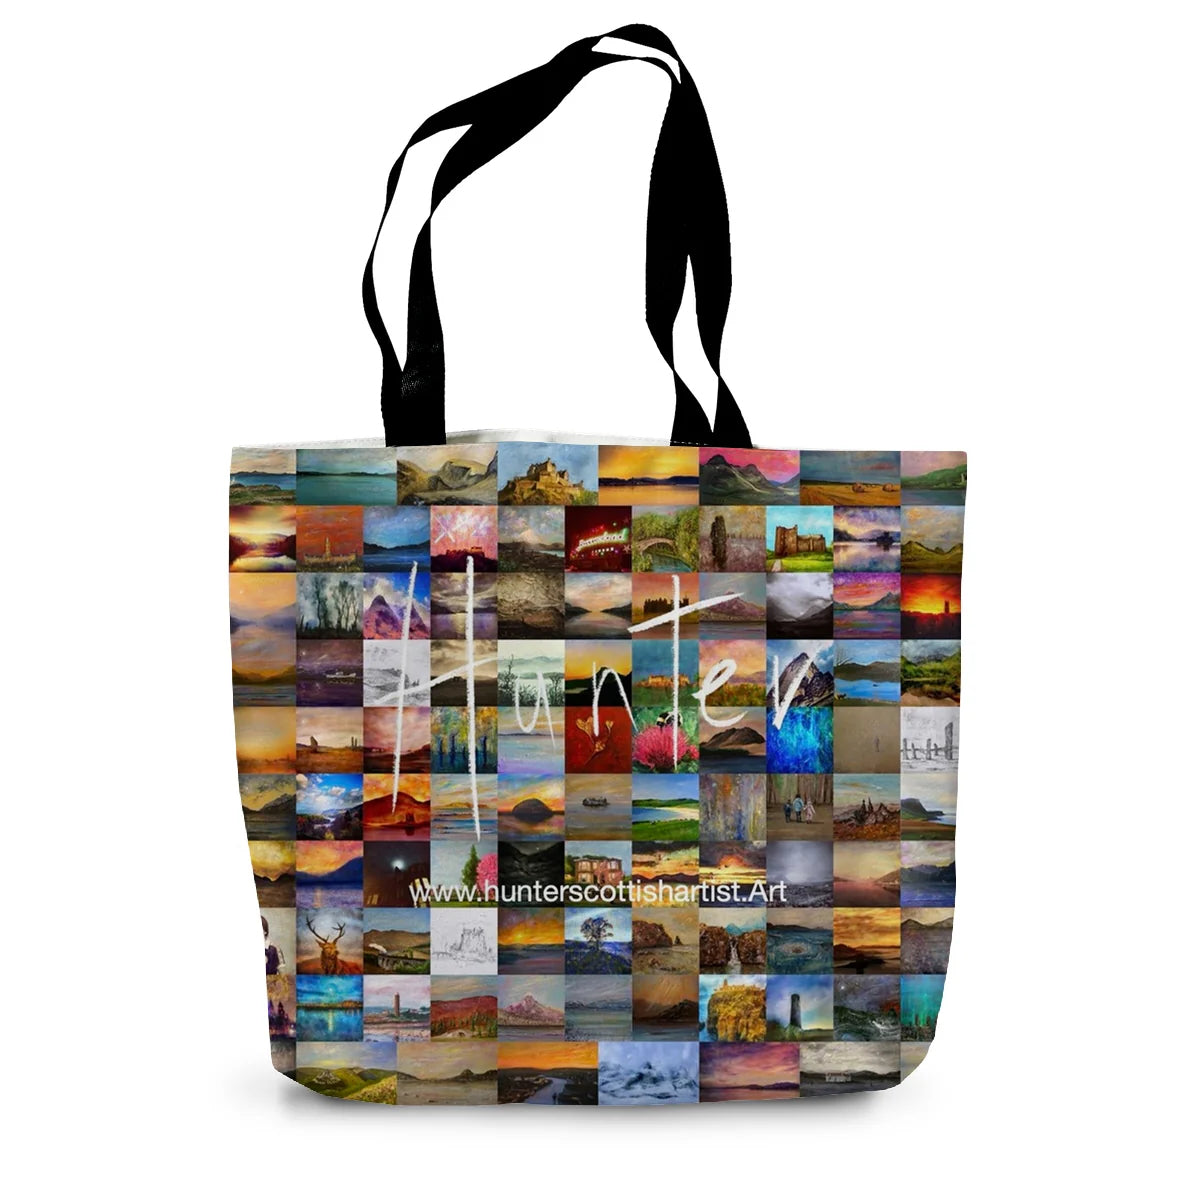 St Andrews Castle Art Gifts Canvas Tote Bag-Bags-Historic & Iconic Scotland Art Gallery-14"x18.5"-Paintings, Prints, Homeware, Art Gifts From Scotland By Scottish Artist Kevin Hunter